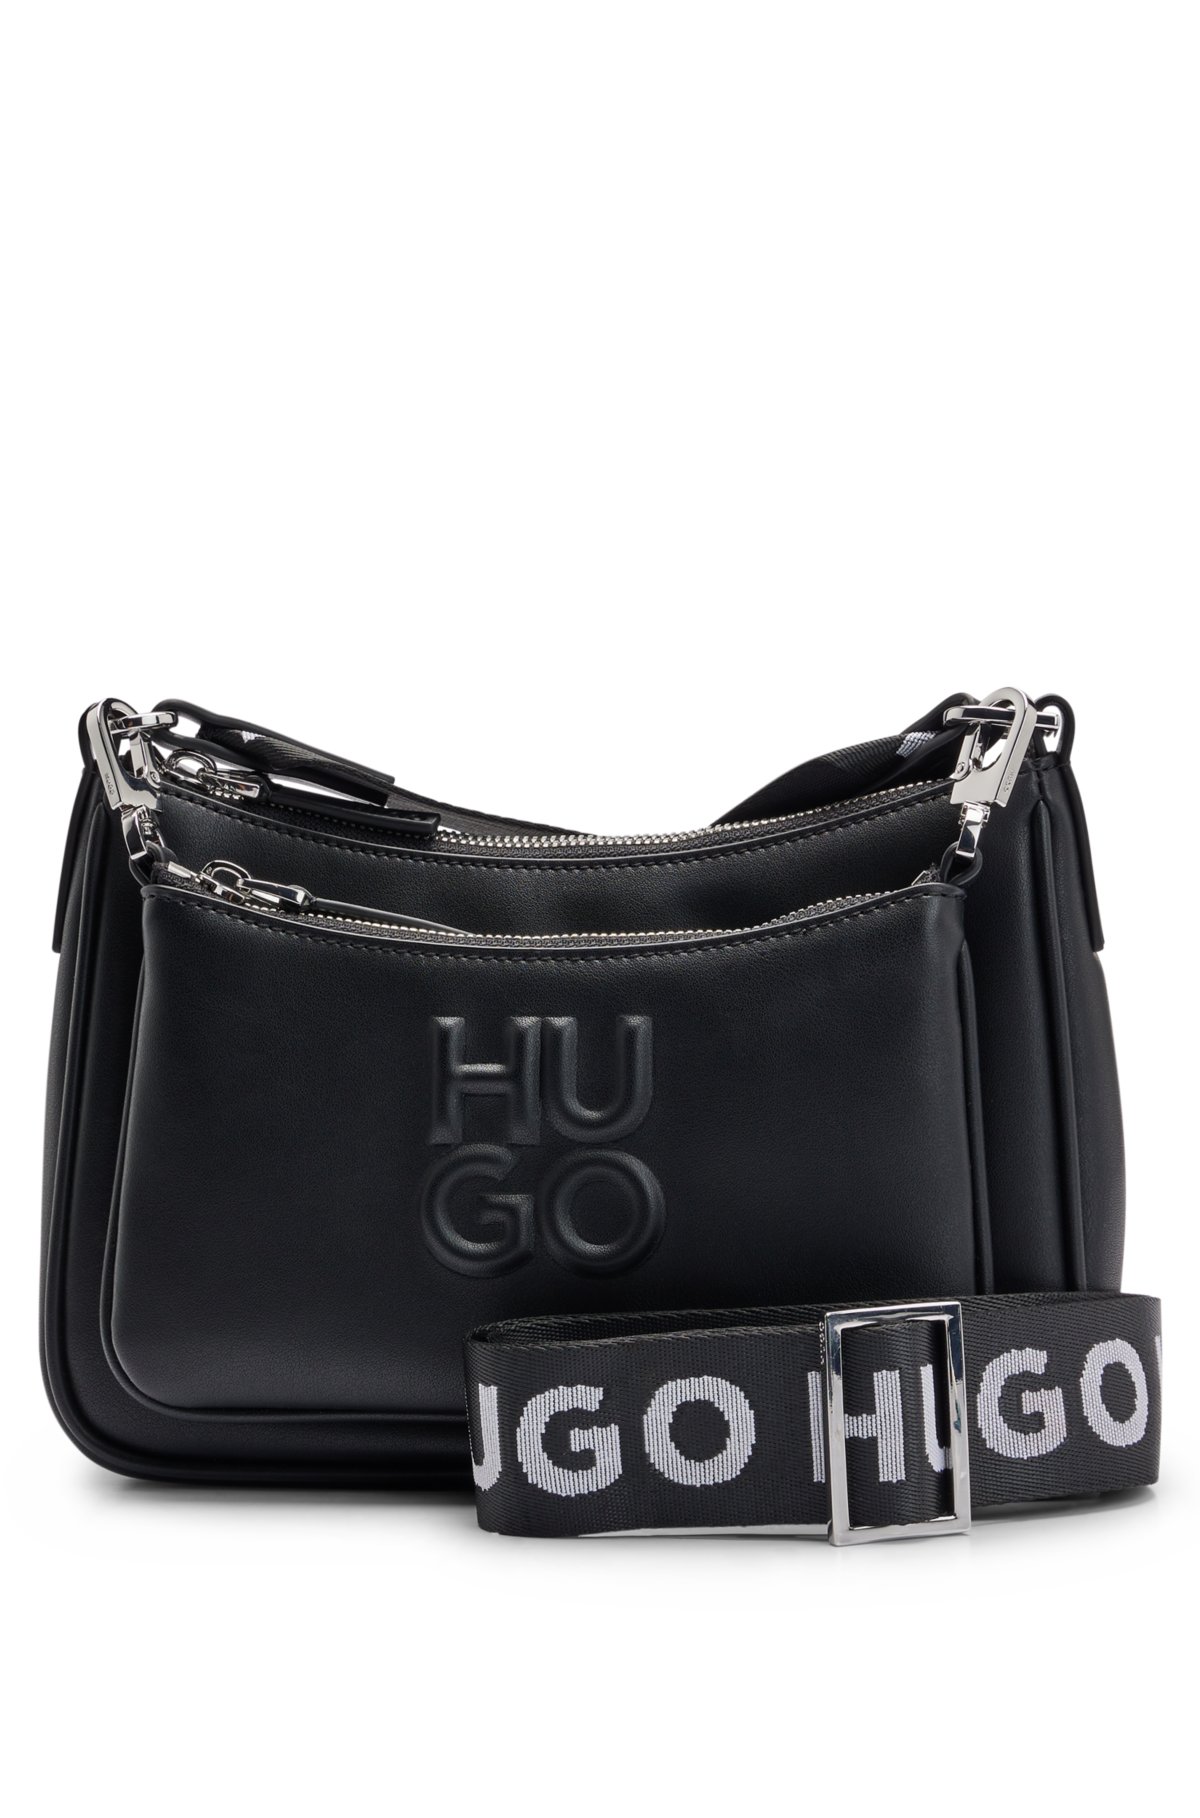 HUGO and pouches bag - with detachable debossed branding Crossbody